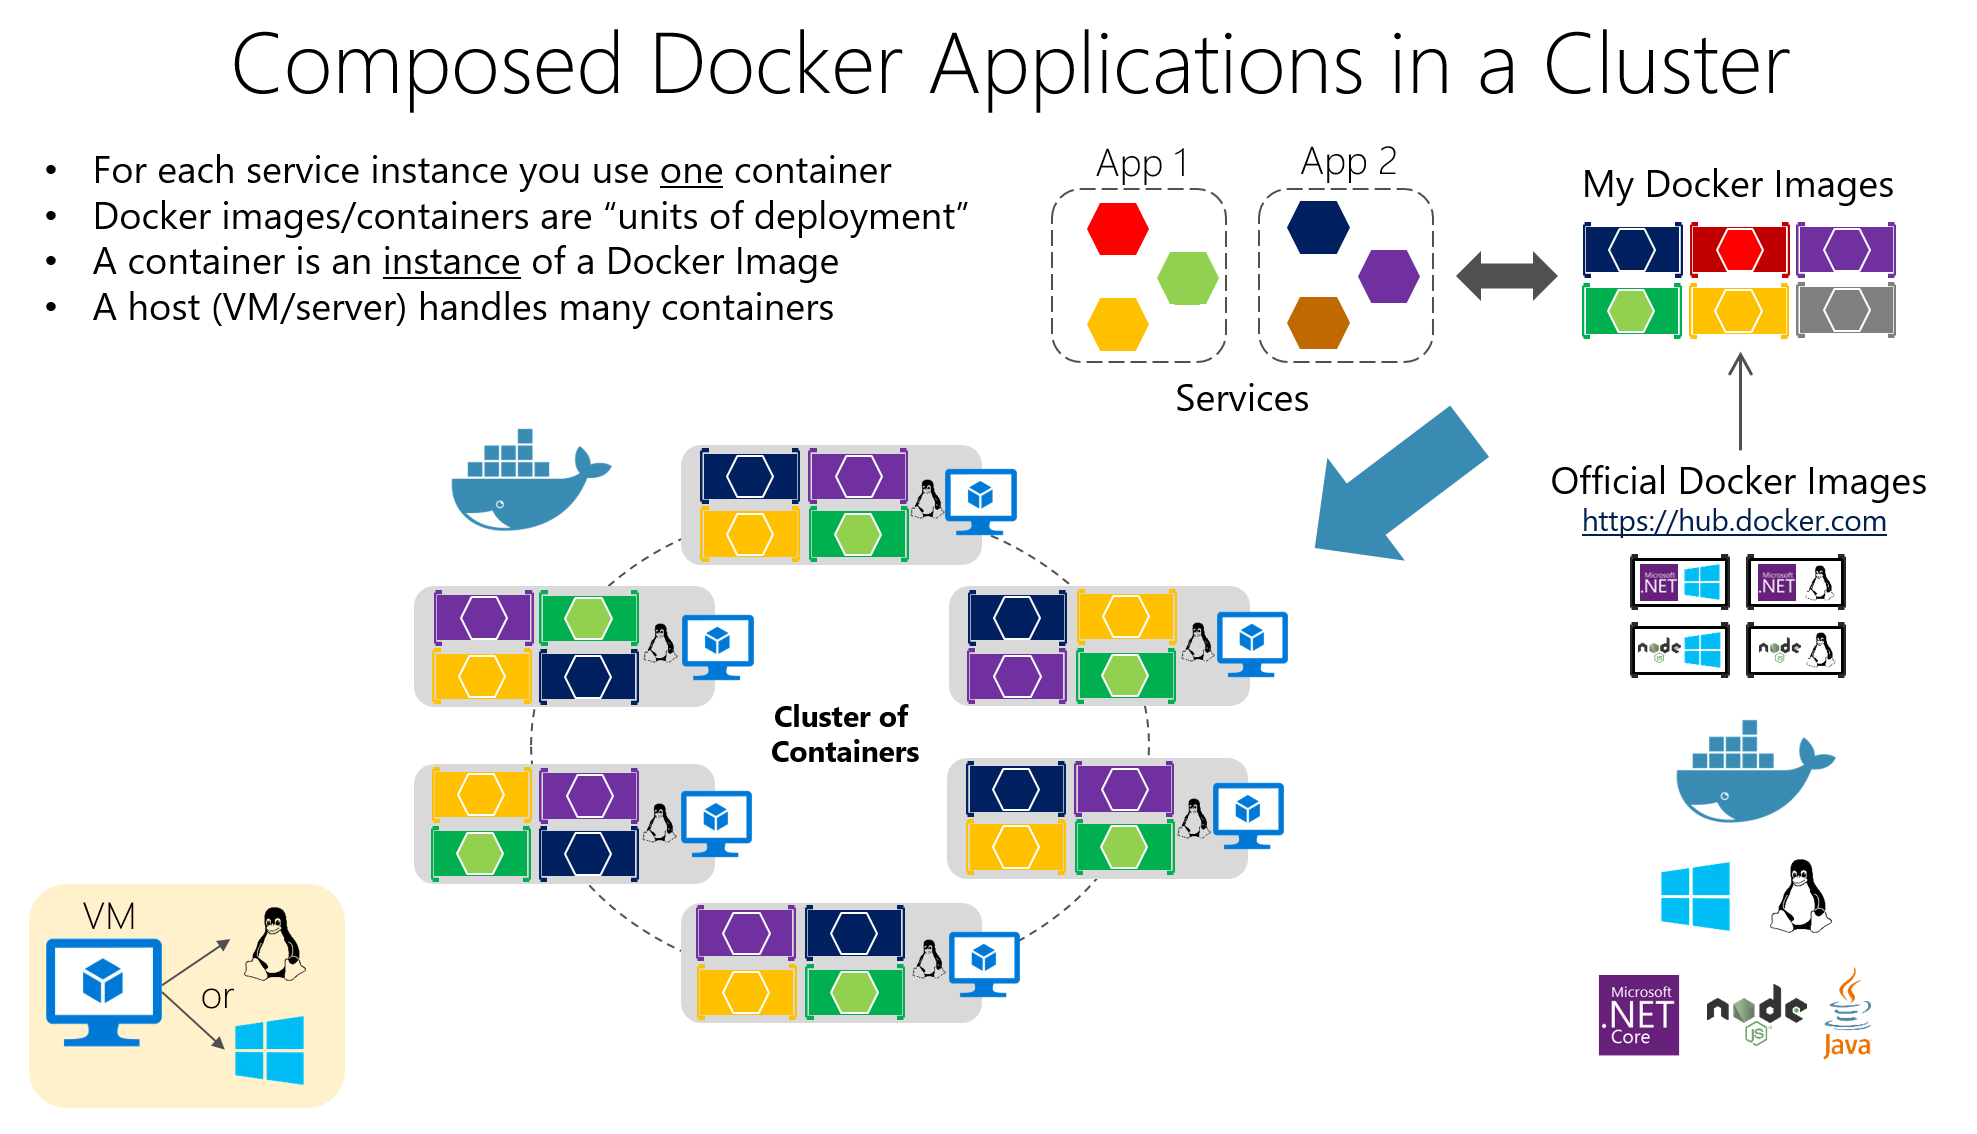 Diagram showing Composed Docker applications in a cluster.